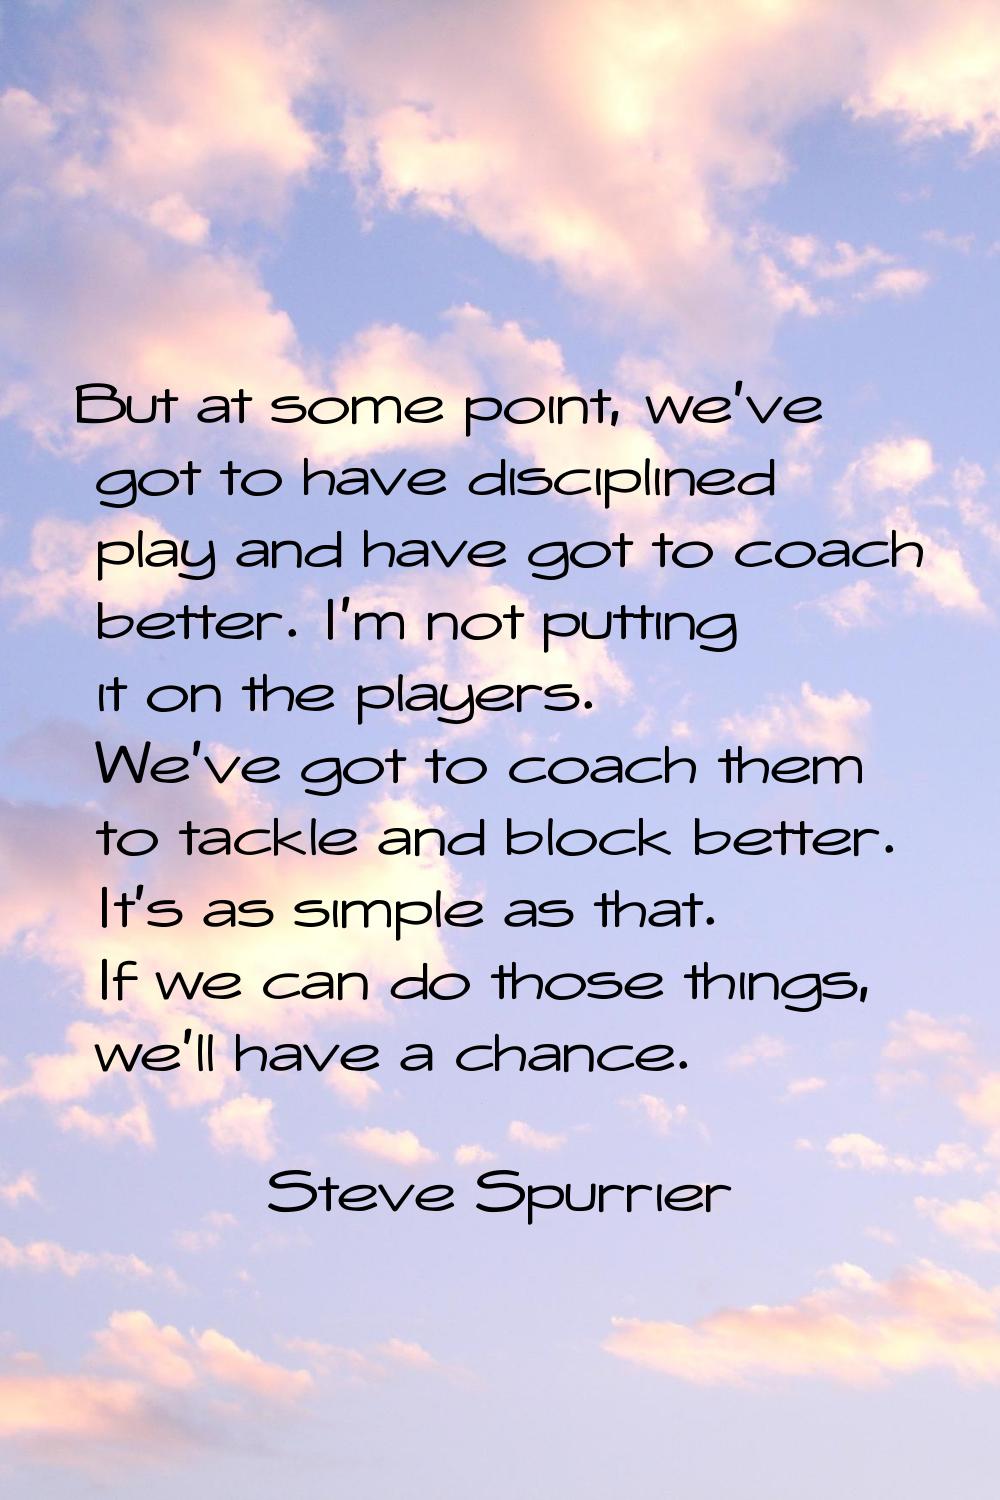 But at some point, we've got to have disciplined play and have got to coach better. I'm not putting